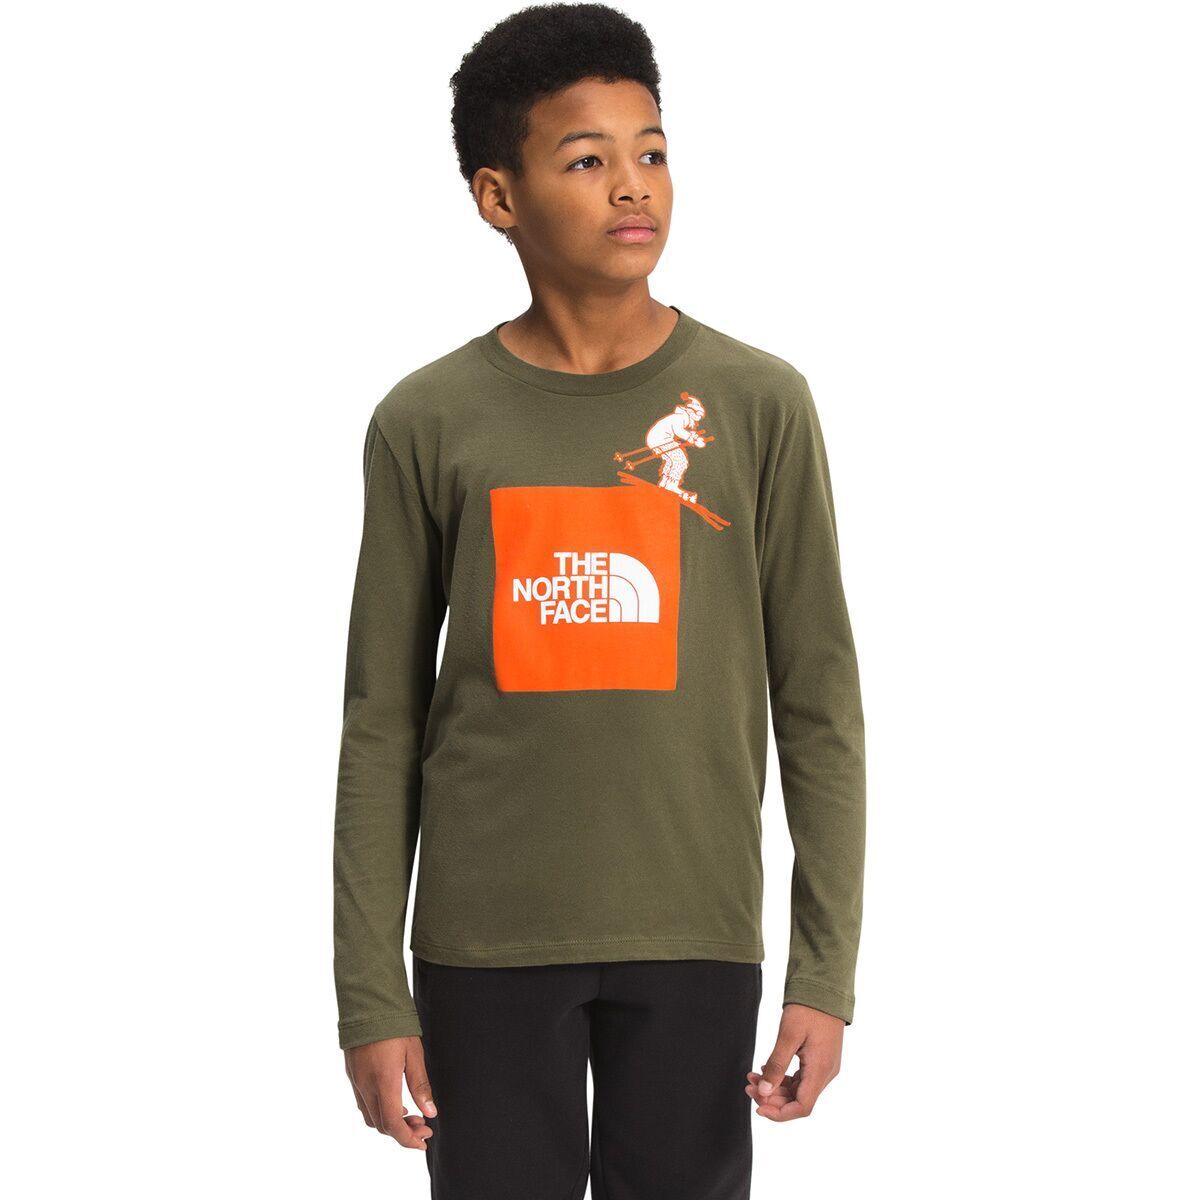 The North Face Graphic Holiday Long-Sleeve T-Shirt - Boys'